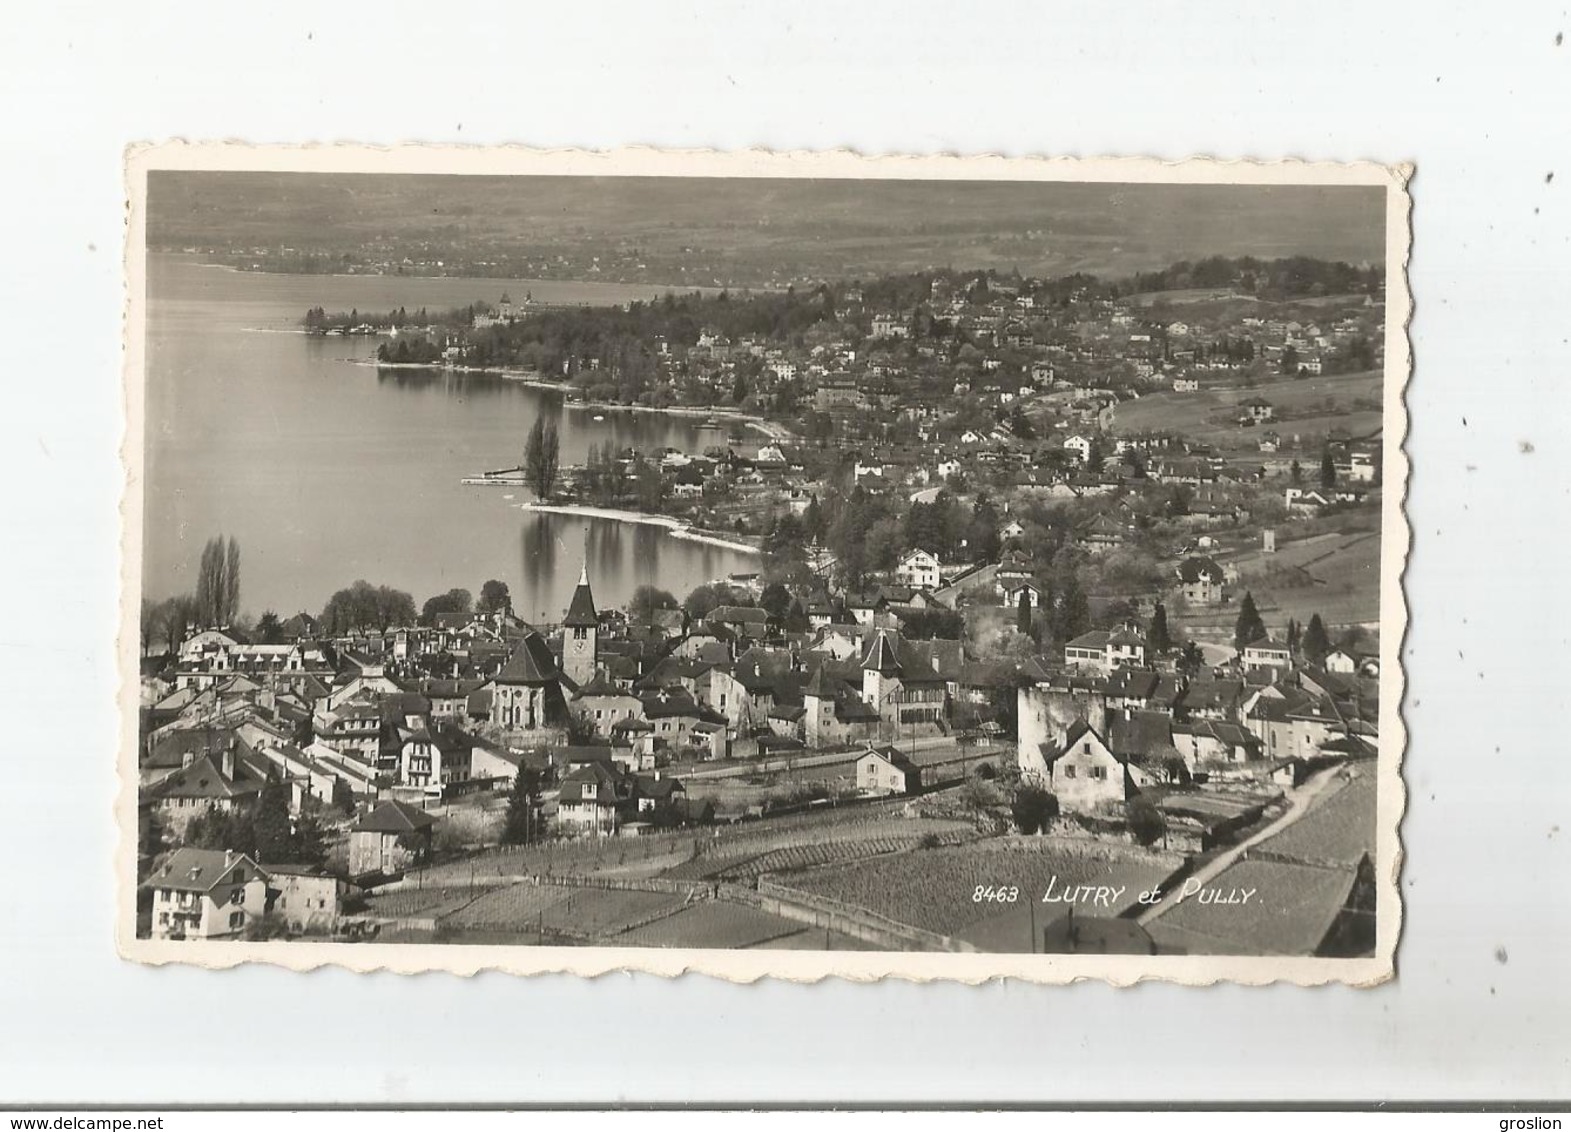 LUTRY ET PULLY 8463 CARTE PHOTO VUES PANORAMIQUES - Pully